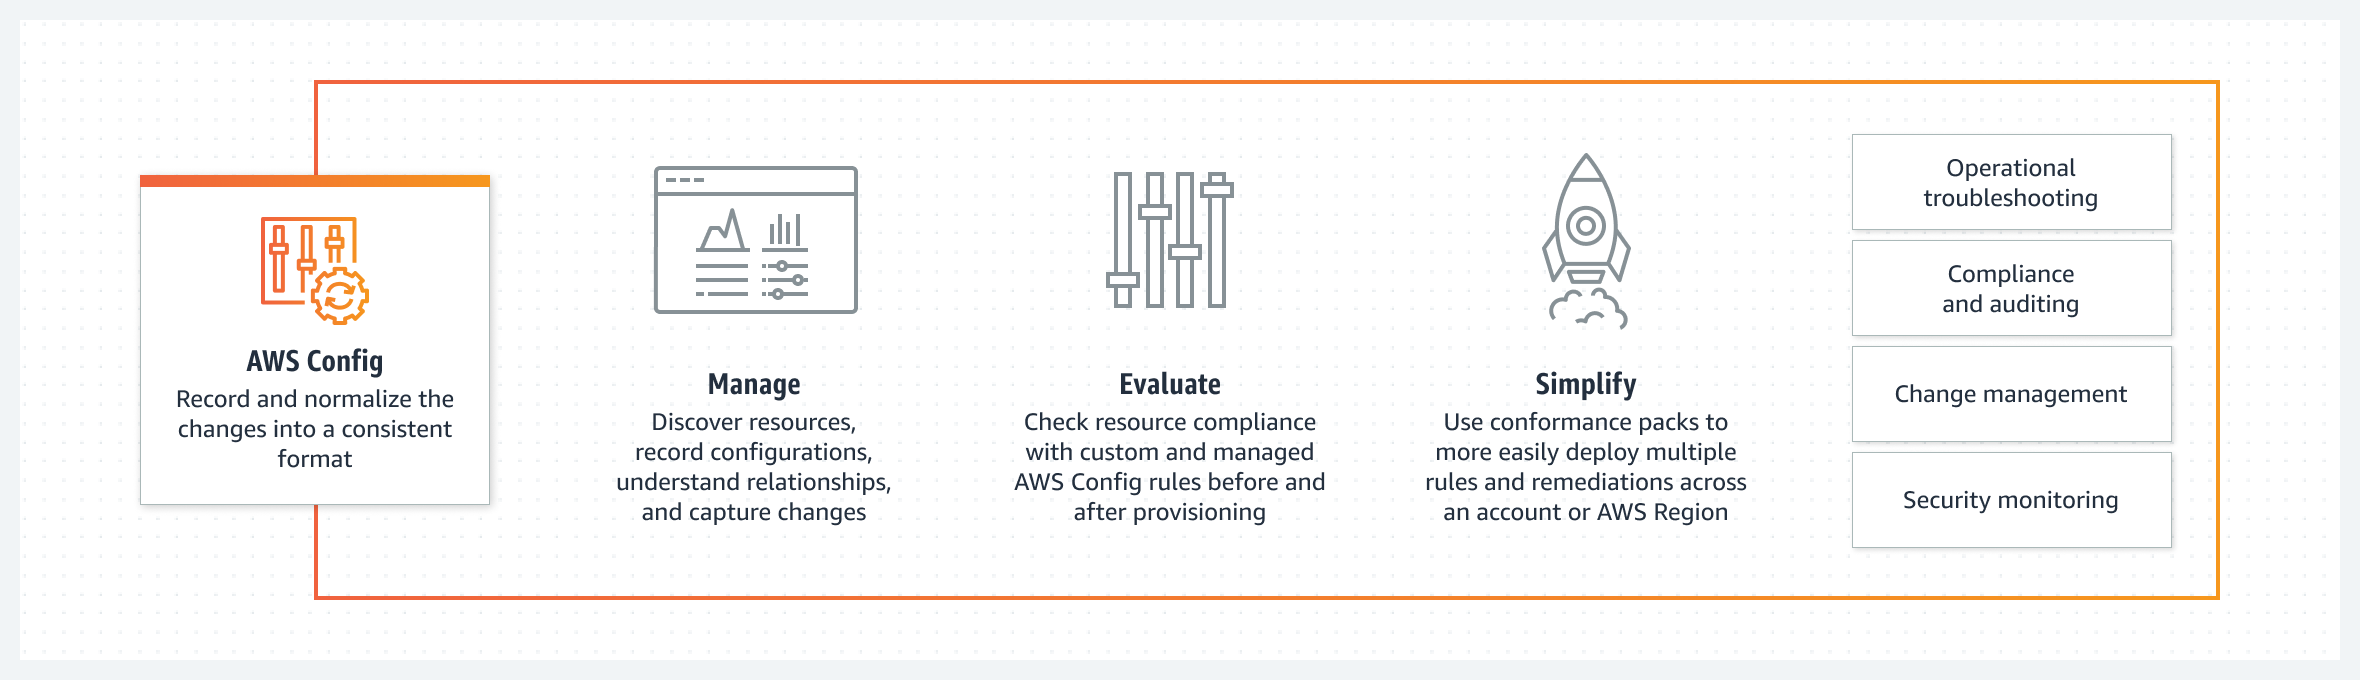 Product-Page-Diagram_AWS-Config_Preventative-Proactive-Rules@2x.903337bdfa605eef1031213a125b9a8f94b39903.png